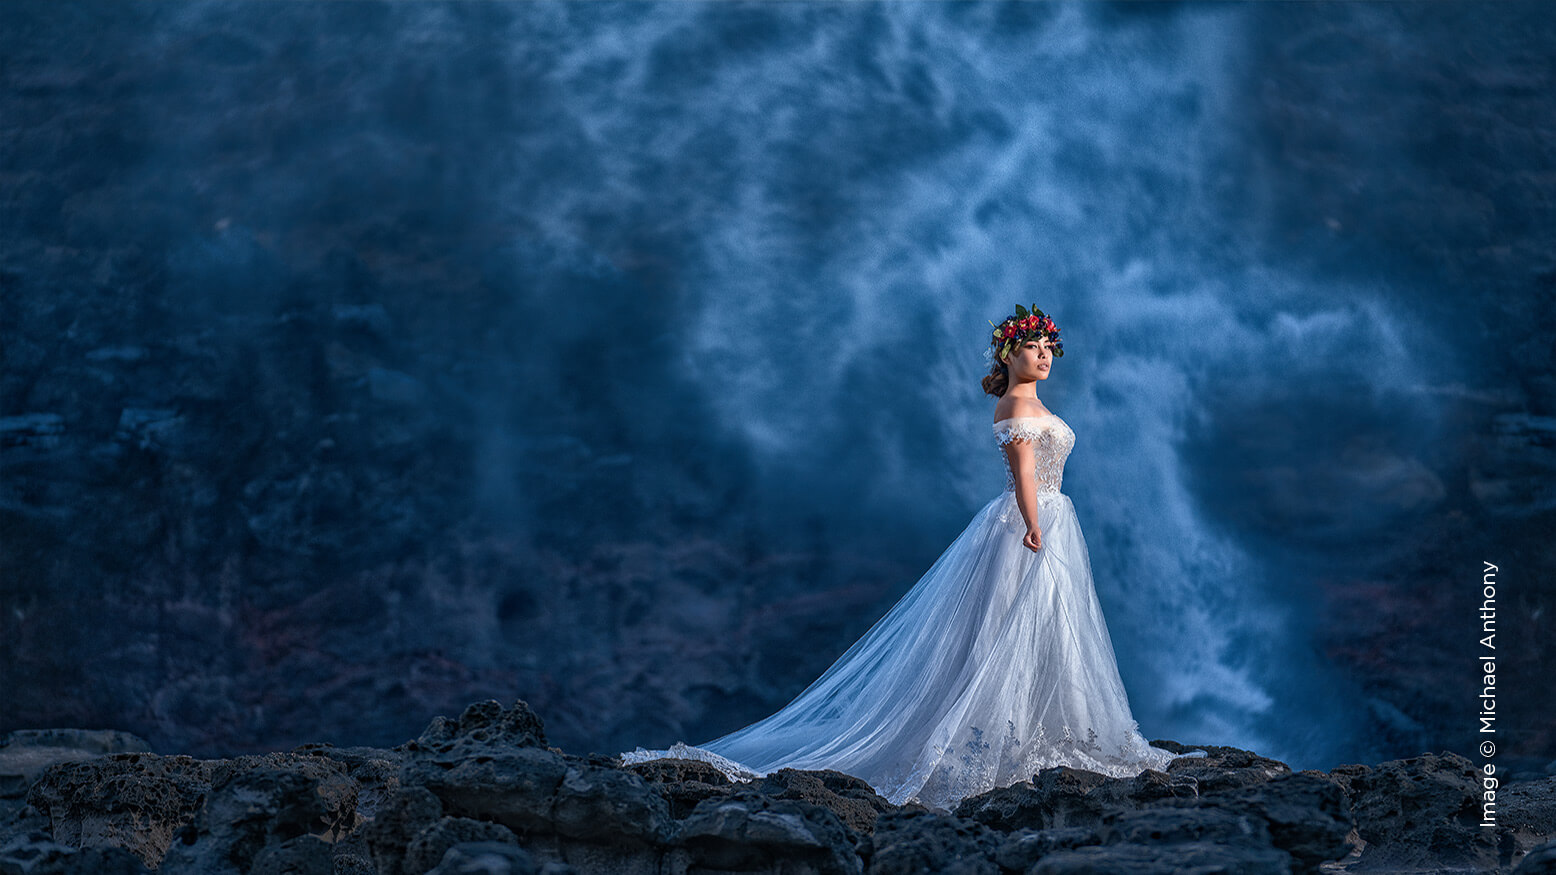 Read more about the article The Wedding Photographer’s Gear Guide: 2018 Edition